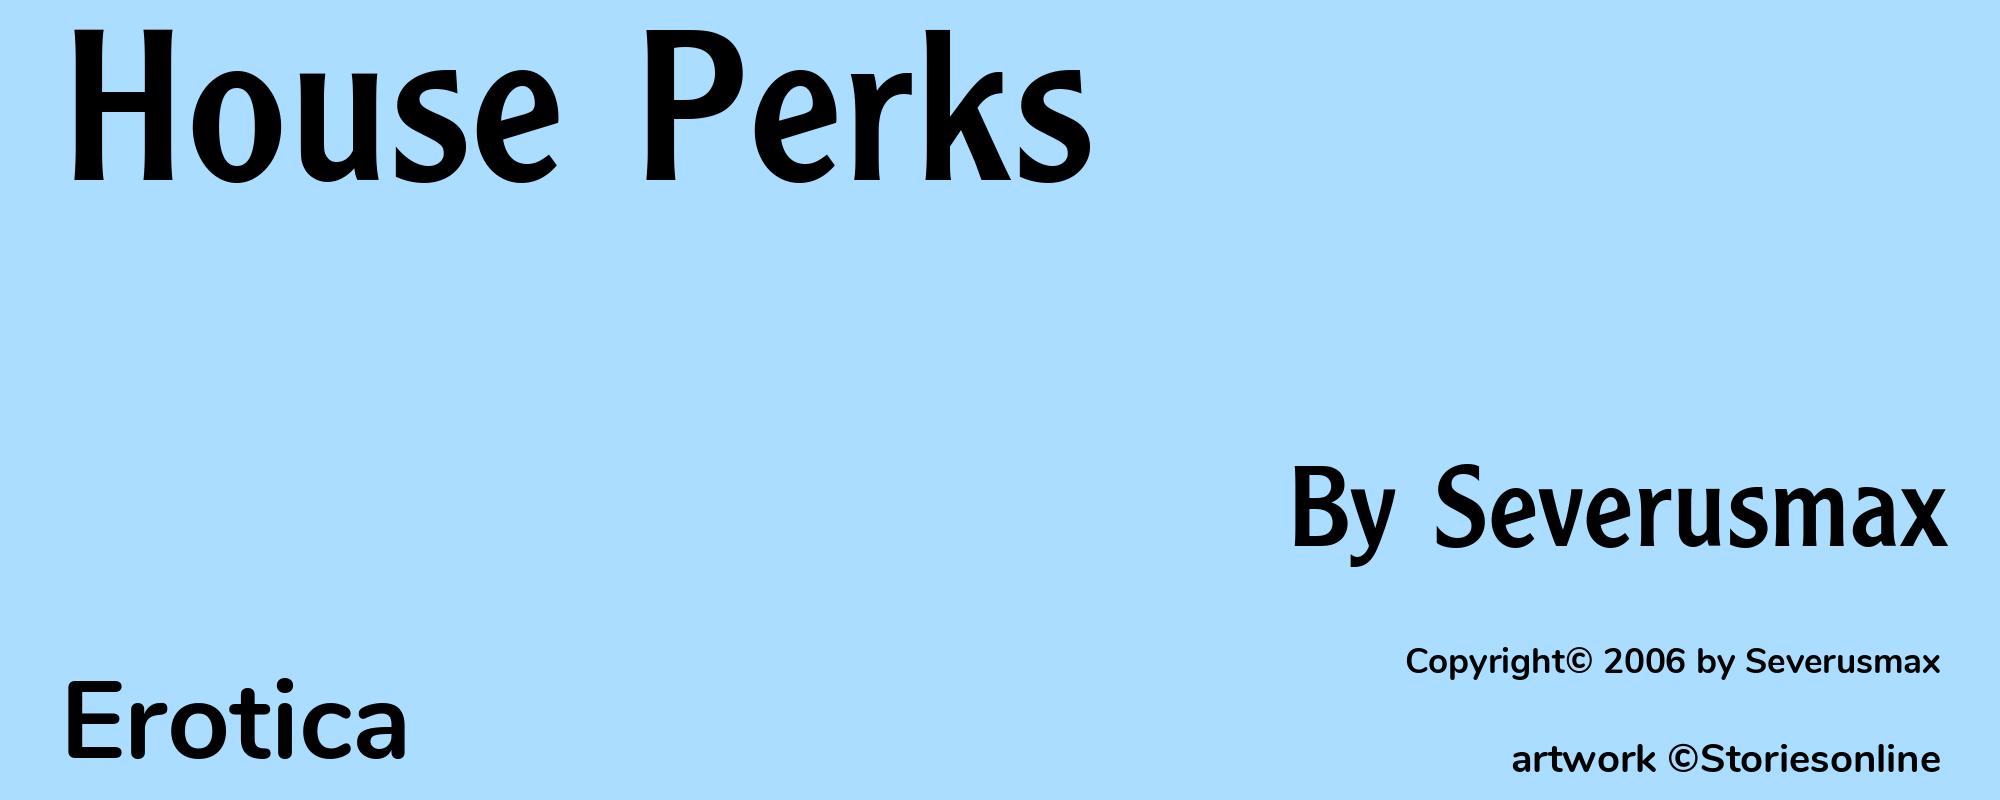 House Perks - Cover